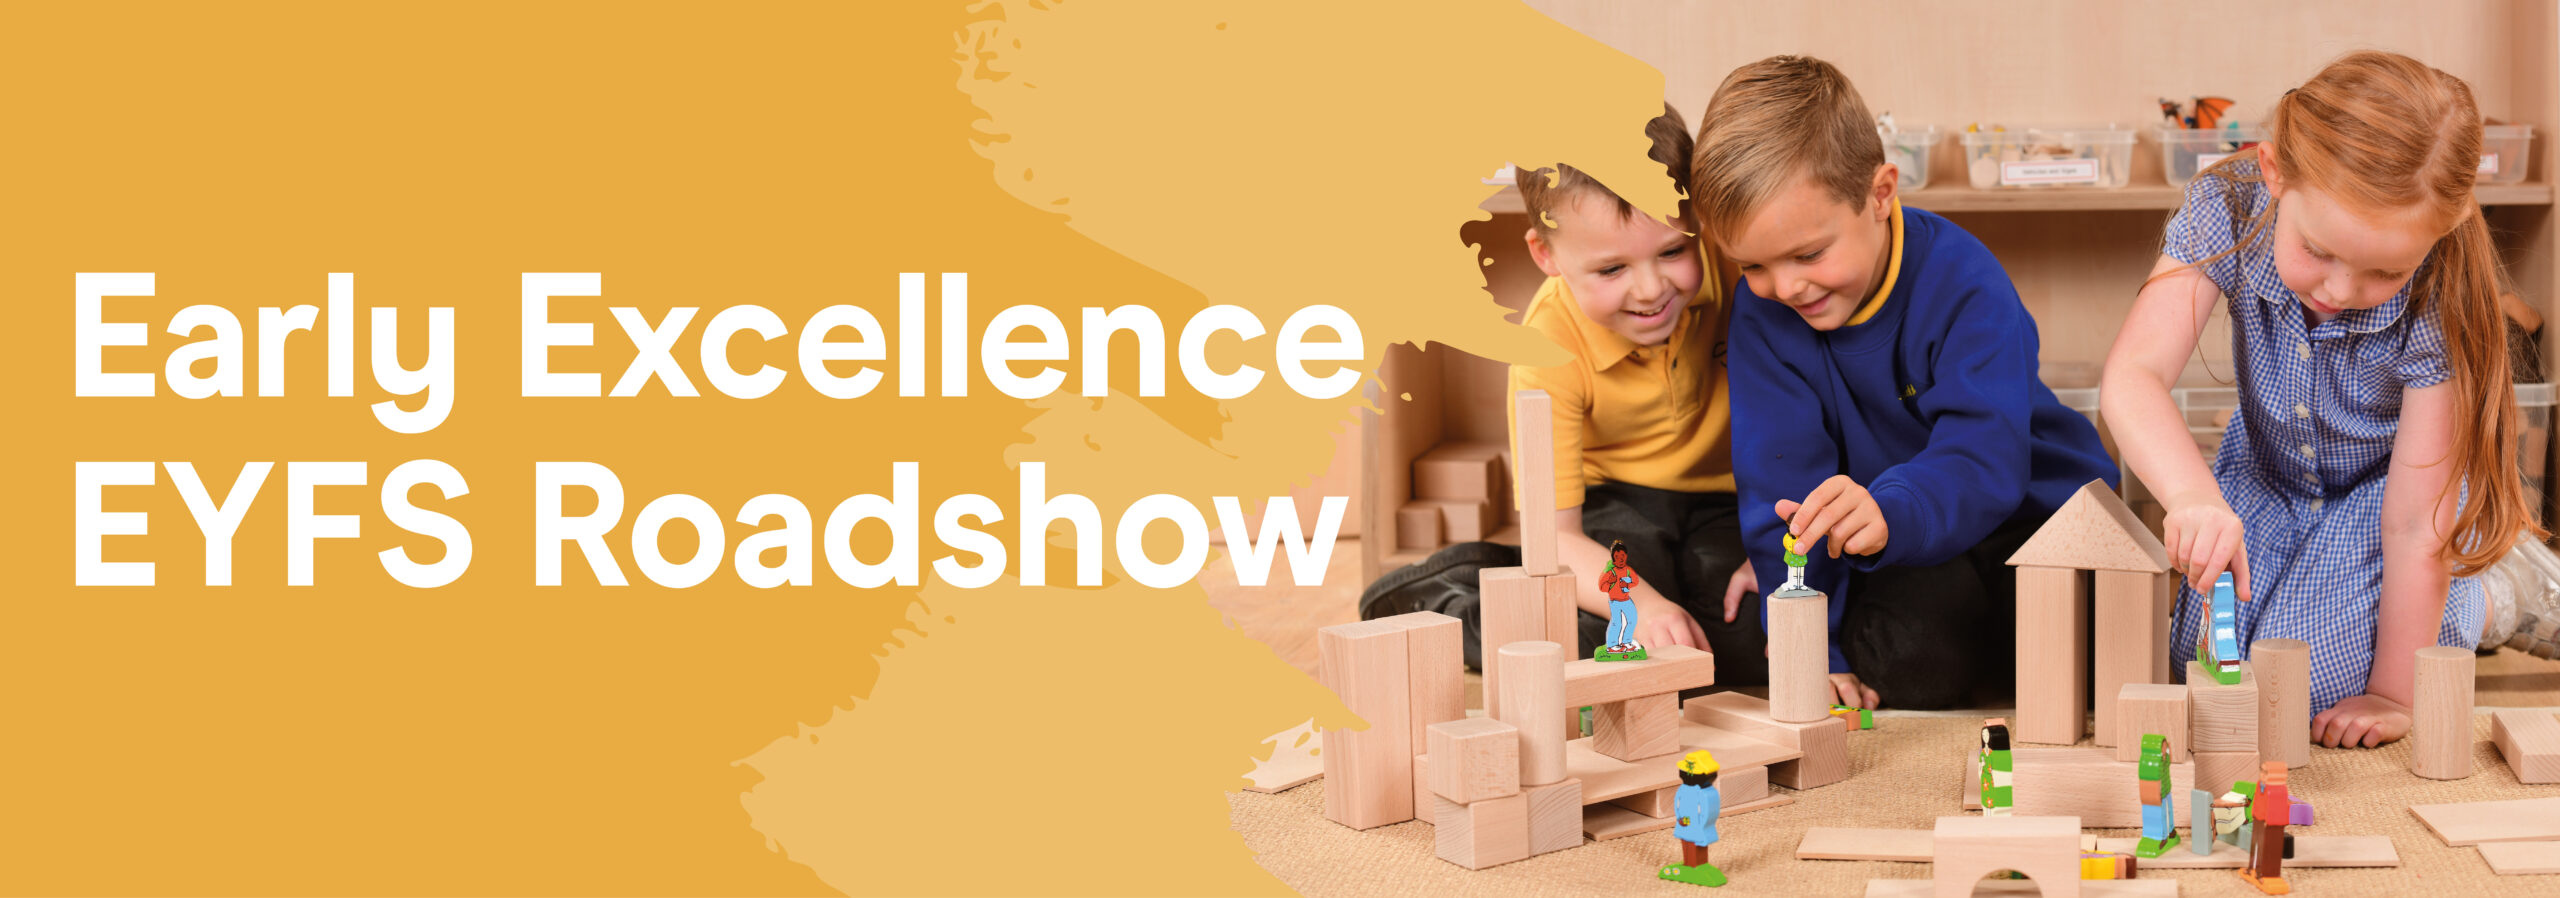 Early Excellence EYFS Roadshow Banner